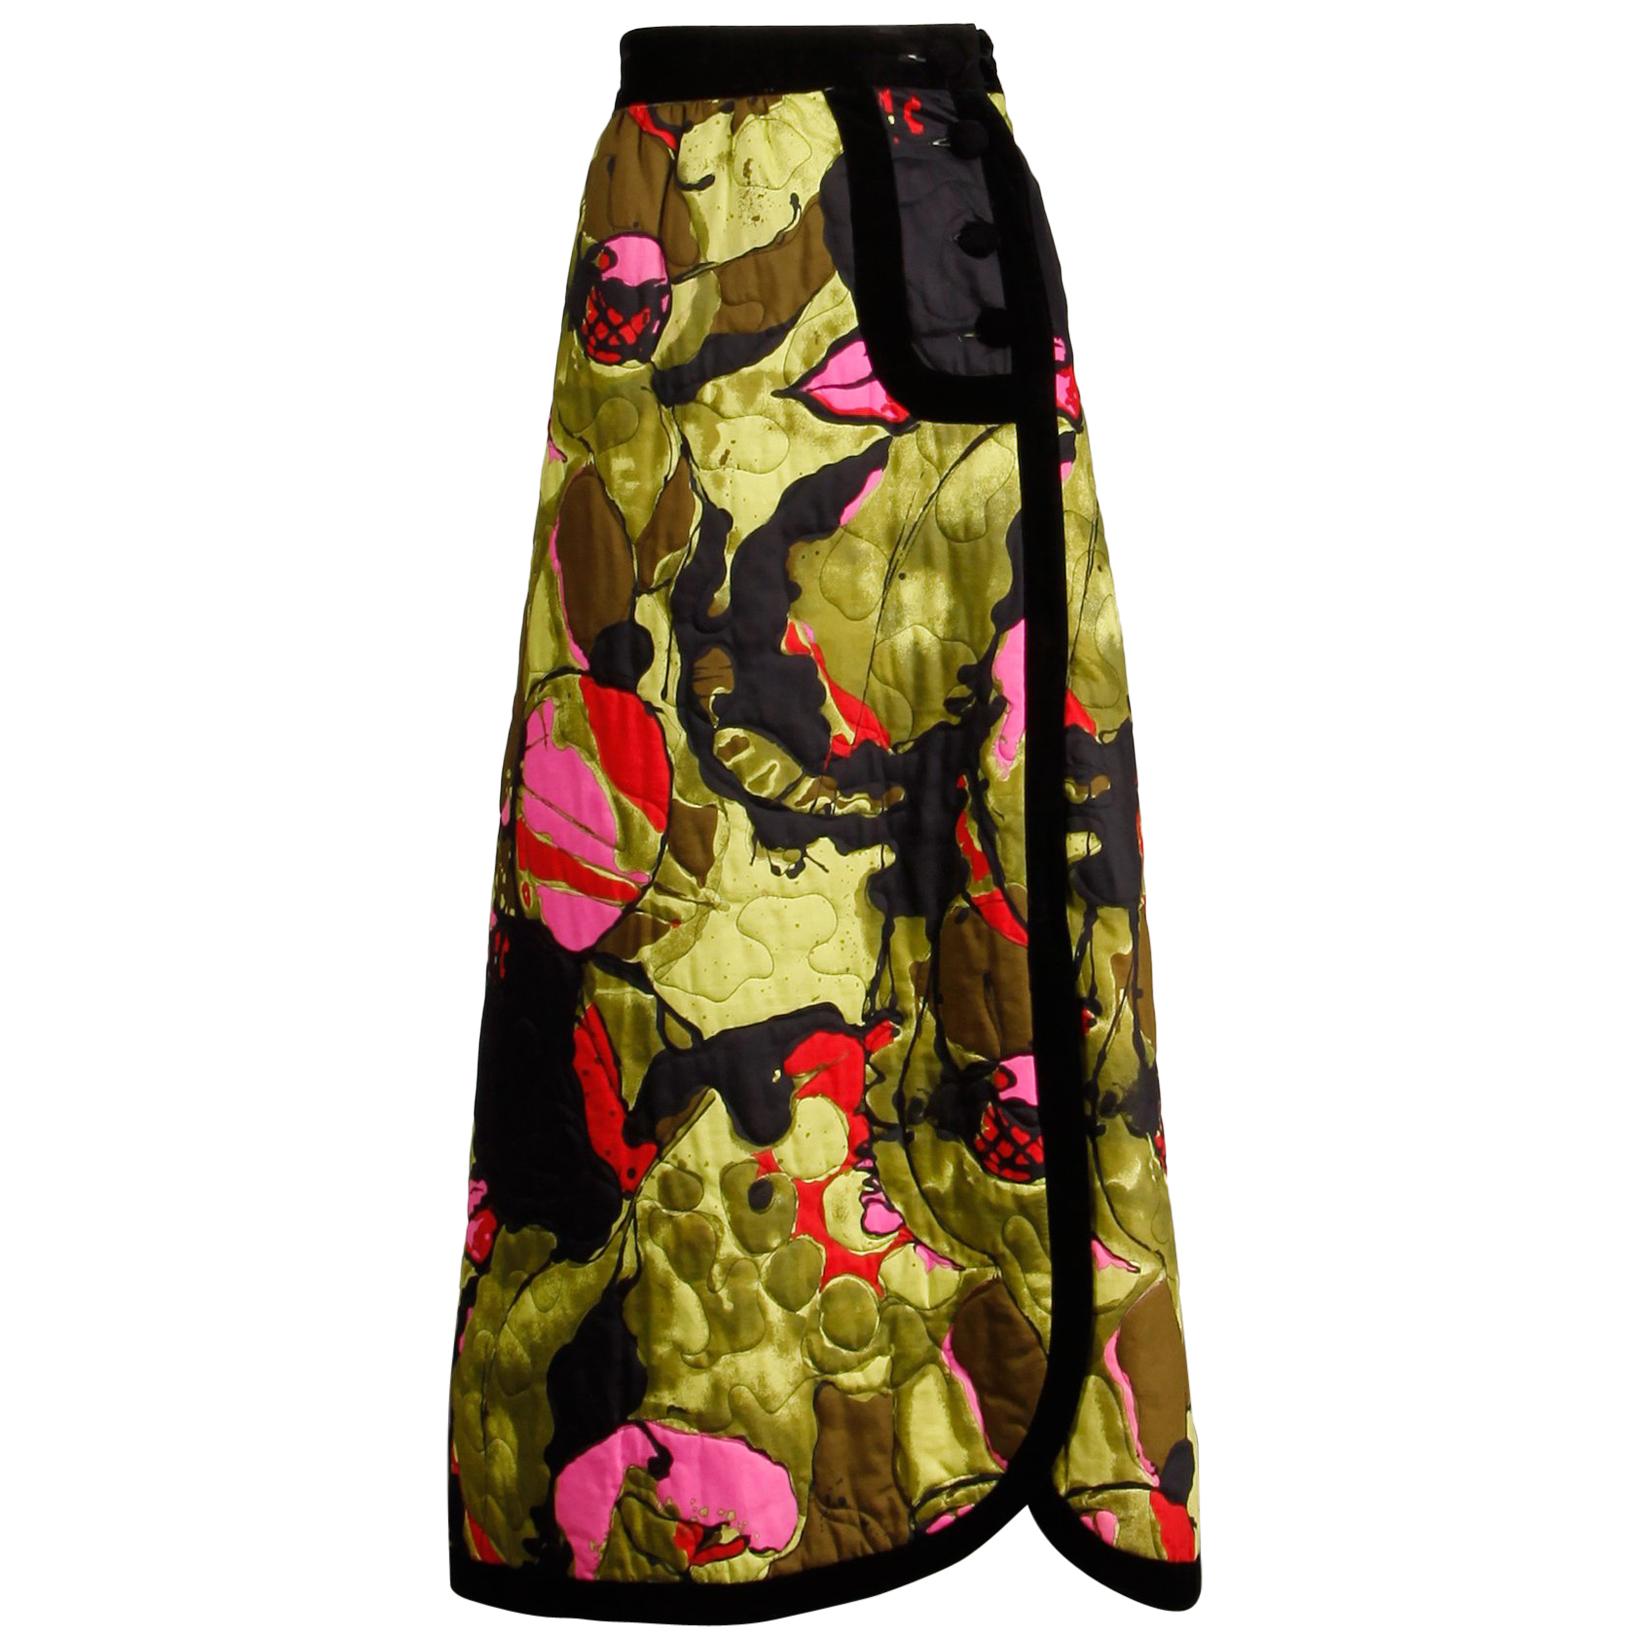 1970s Dynasty Vintage Quilted Silk + Velvet Maxi Skirt in Green Black Pink + Red